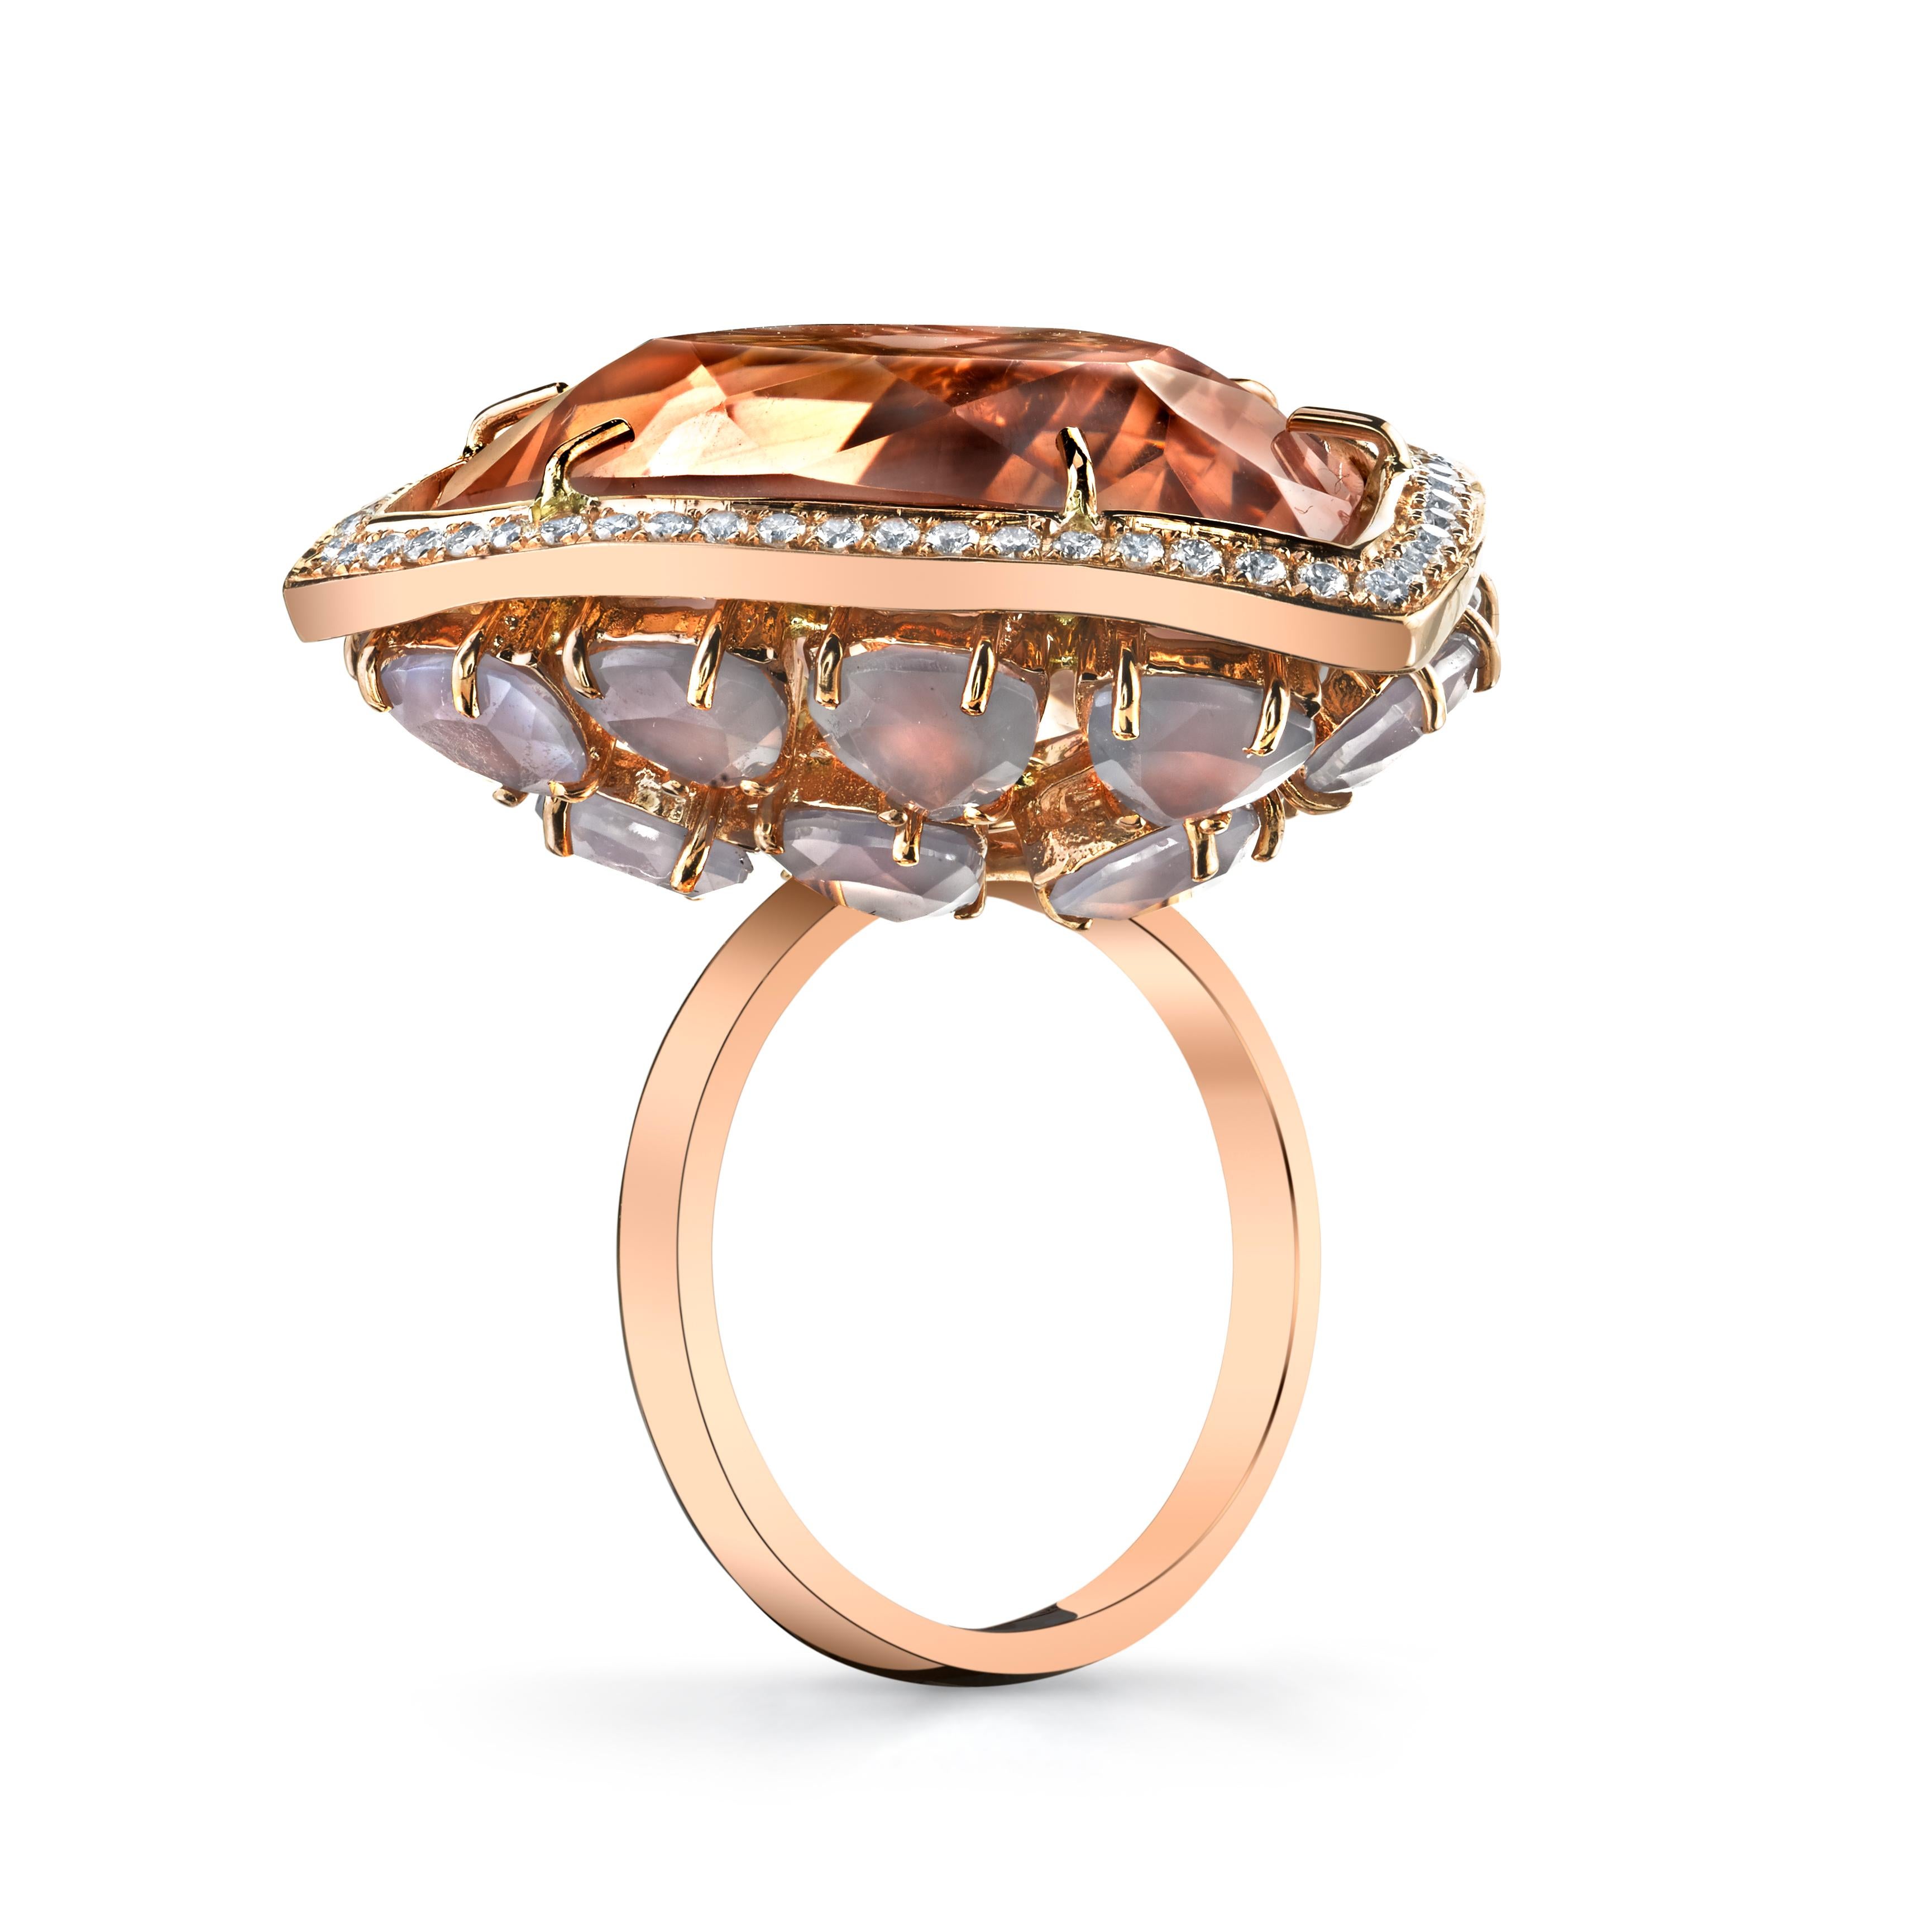 Pink Rose Quartz Horizon Ring features a large custom triangle-cut rose quartz framed with a bezel of white diamonds and supported by a covert bejeweled under gallery of custom triangle-cut opals. 

18k Rose Gold
Rose Quartz
Opals
White Diamonds